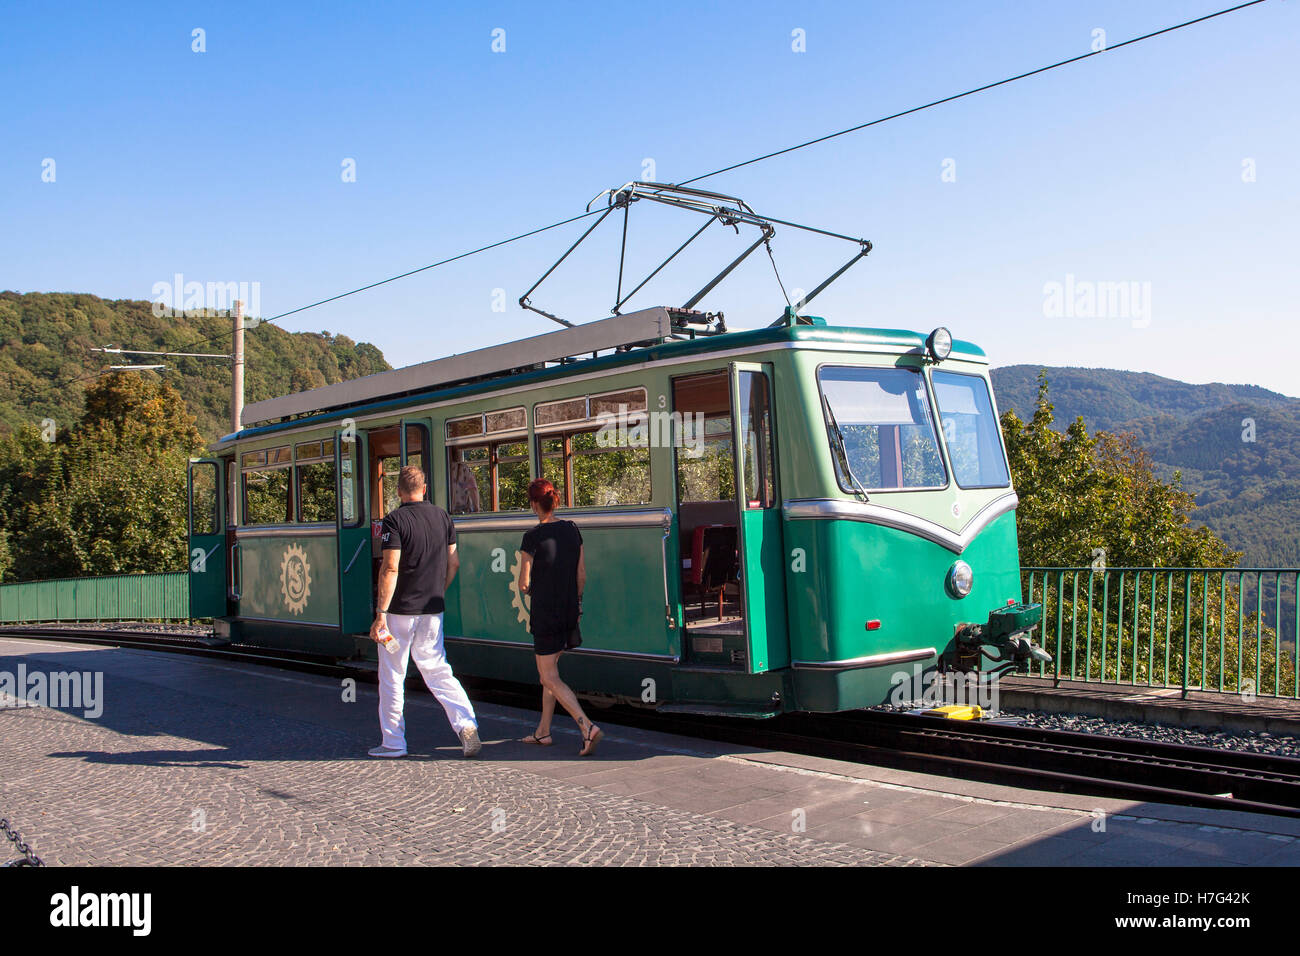 Germany, Siebengebirge, rack railway at the Drachenfels mountain, this rack railway is the oldest in Germany, since 1883. Stock Photo